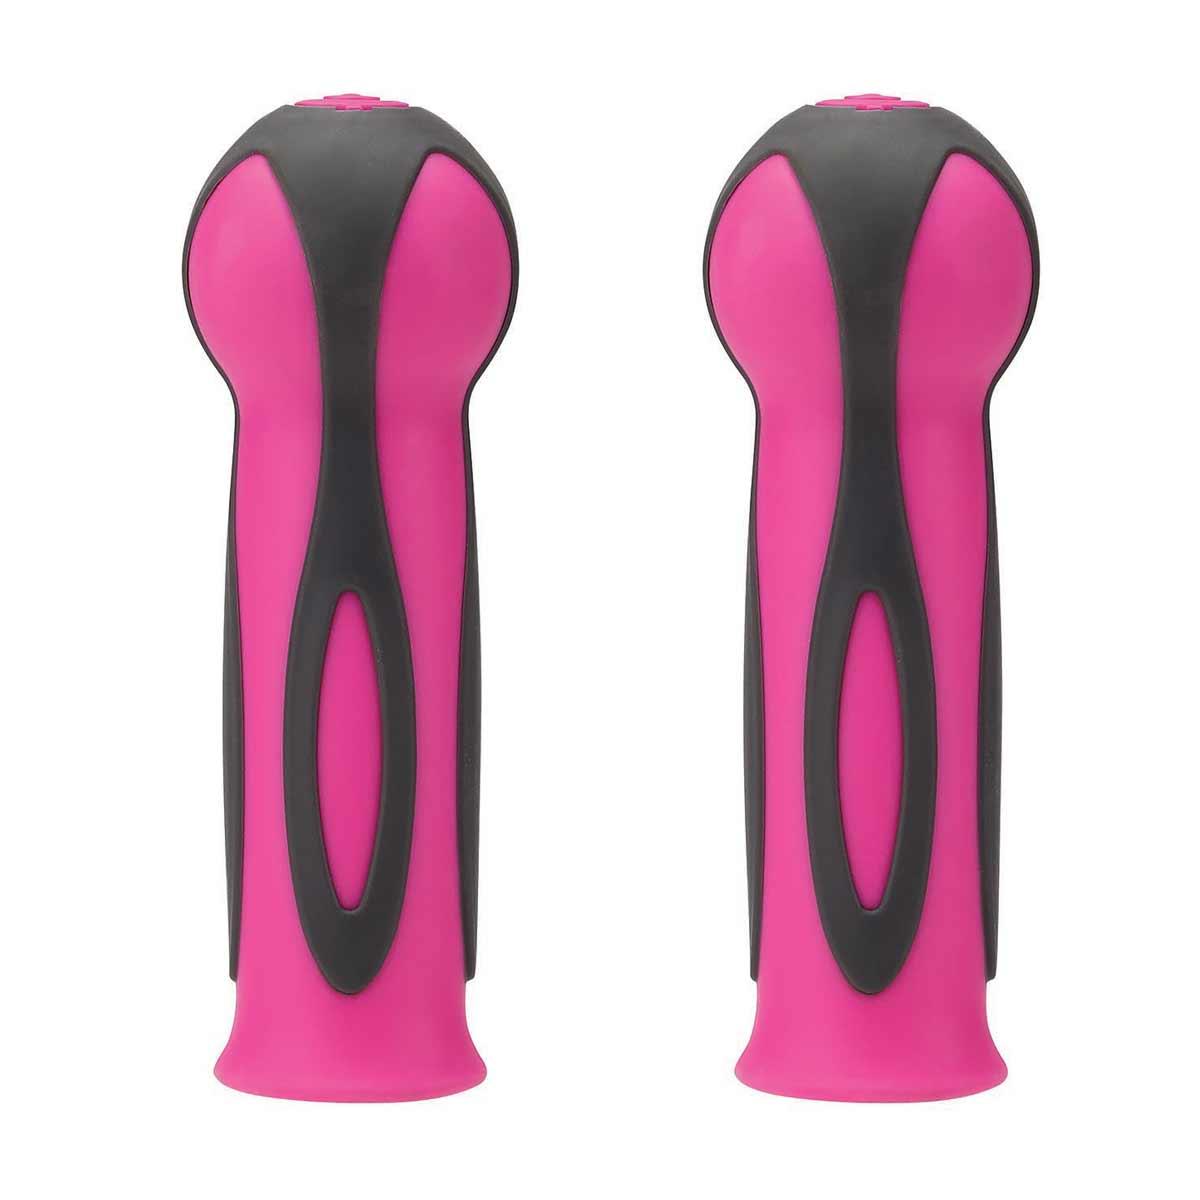 Spare parts: Scooter Handlebar Grips - set of 2 pink - MoonyBoon